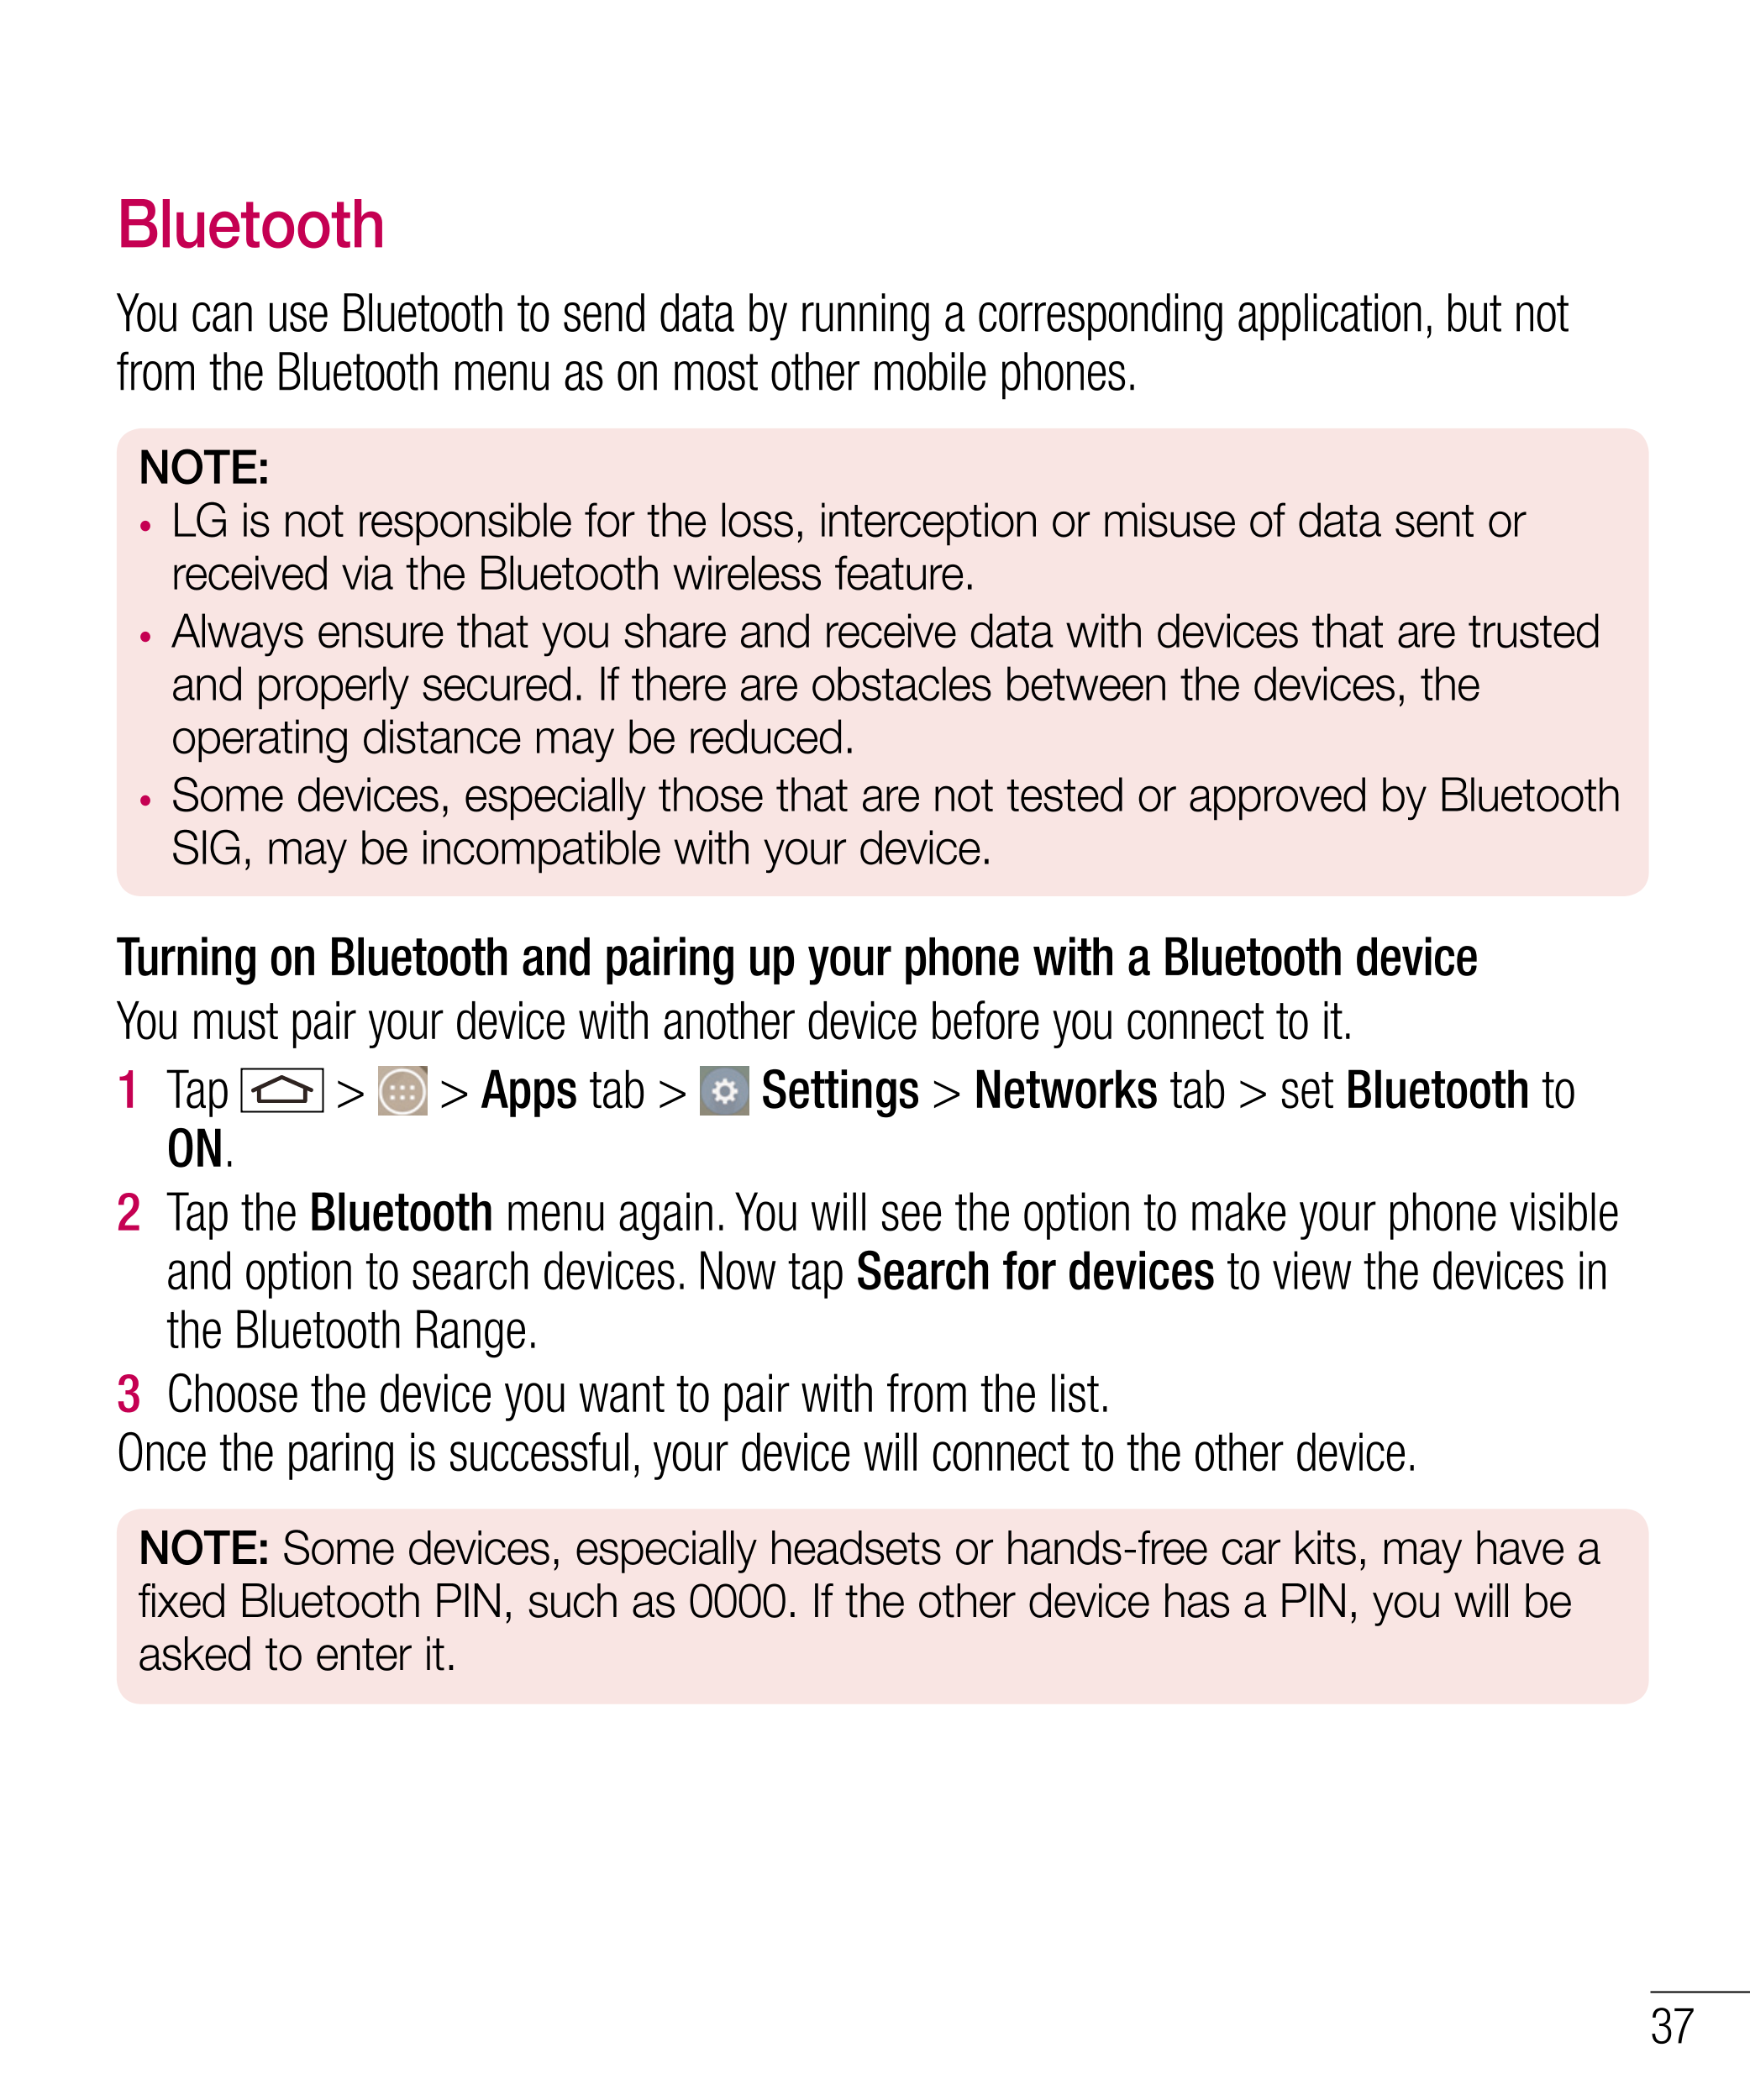 Bluetooth
You can use Bluetooth to send data by running a corresponding application, but not 
from the Bluetooth menu as on most